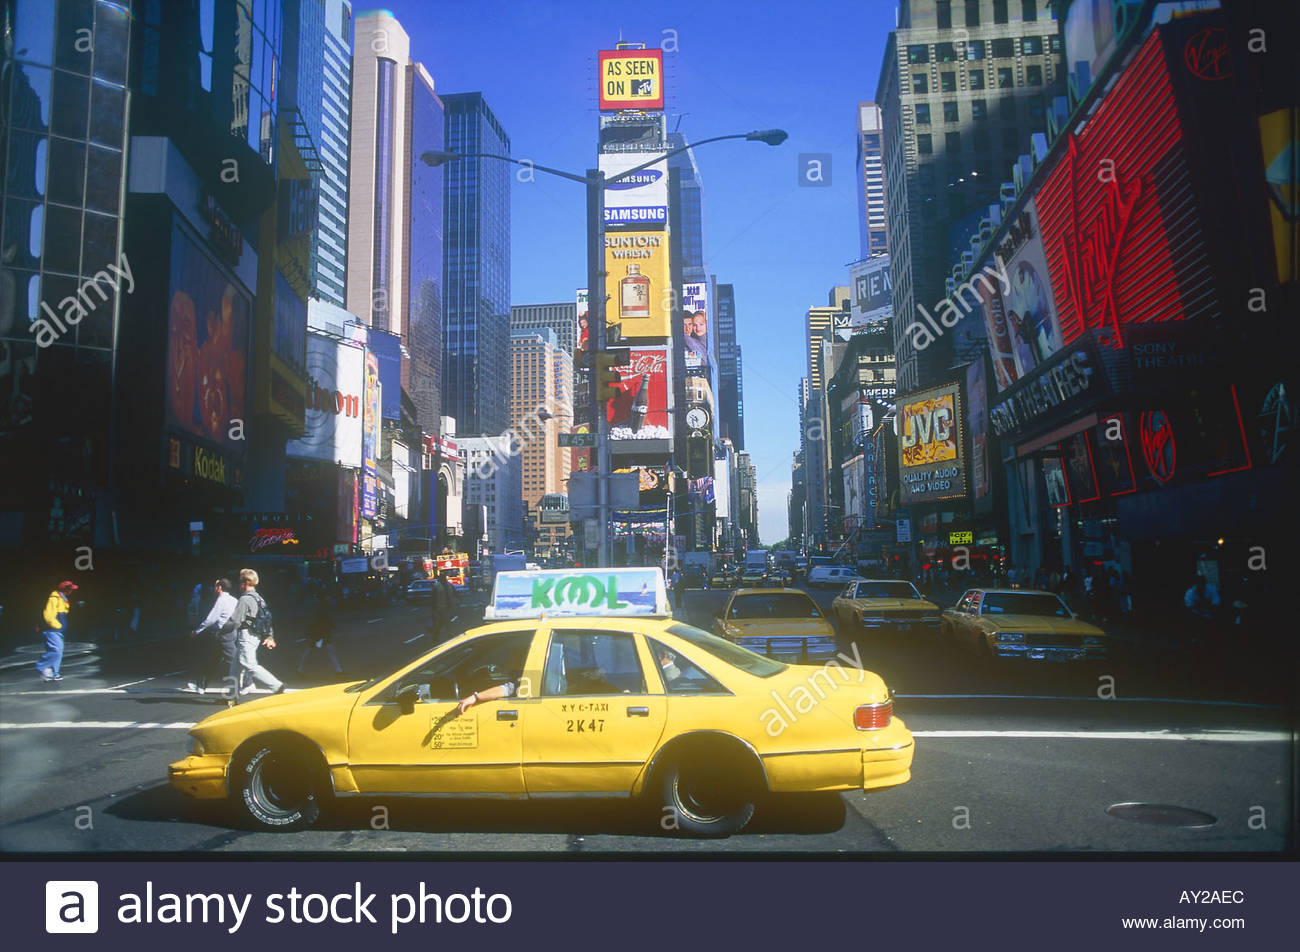 buildings-cab-city-new-road-street-taxi-